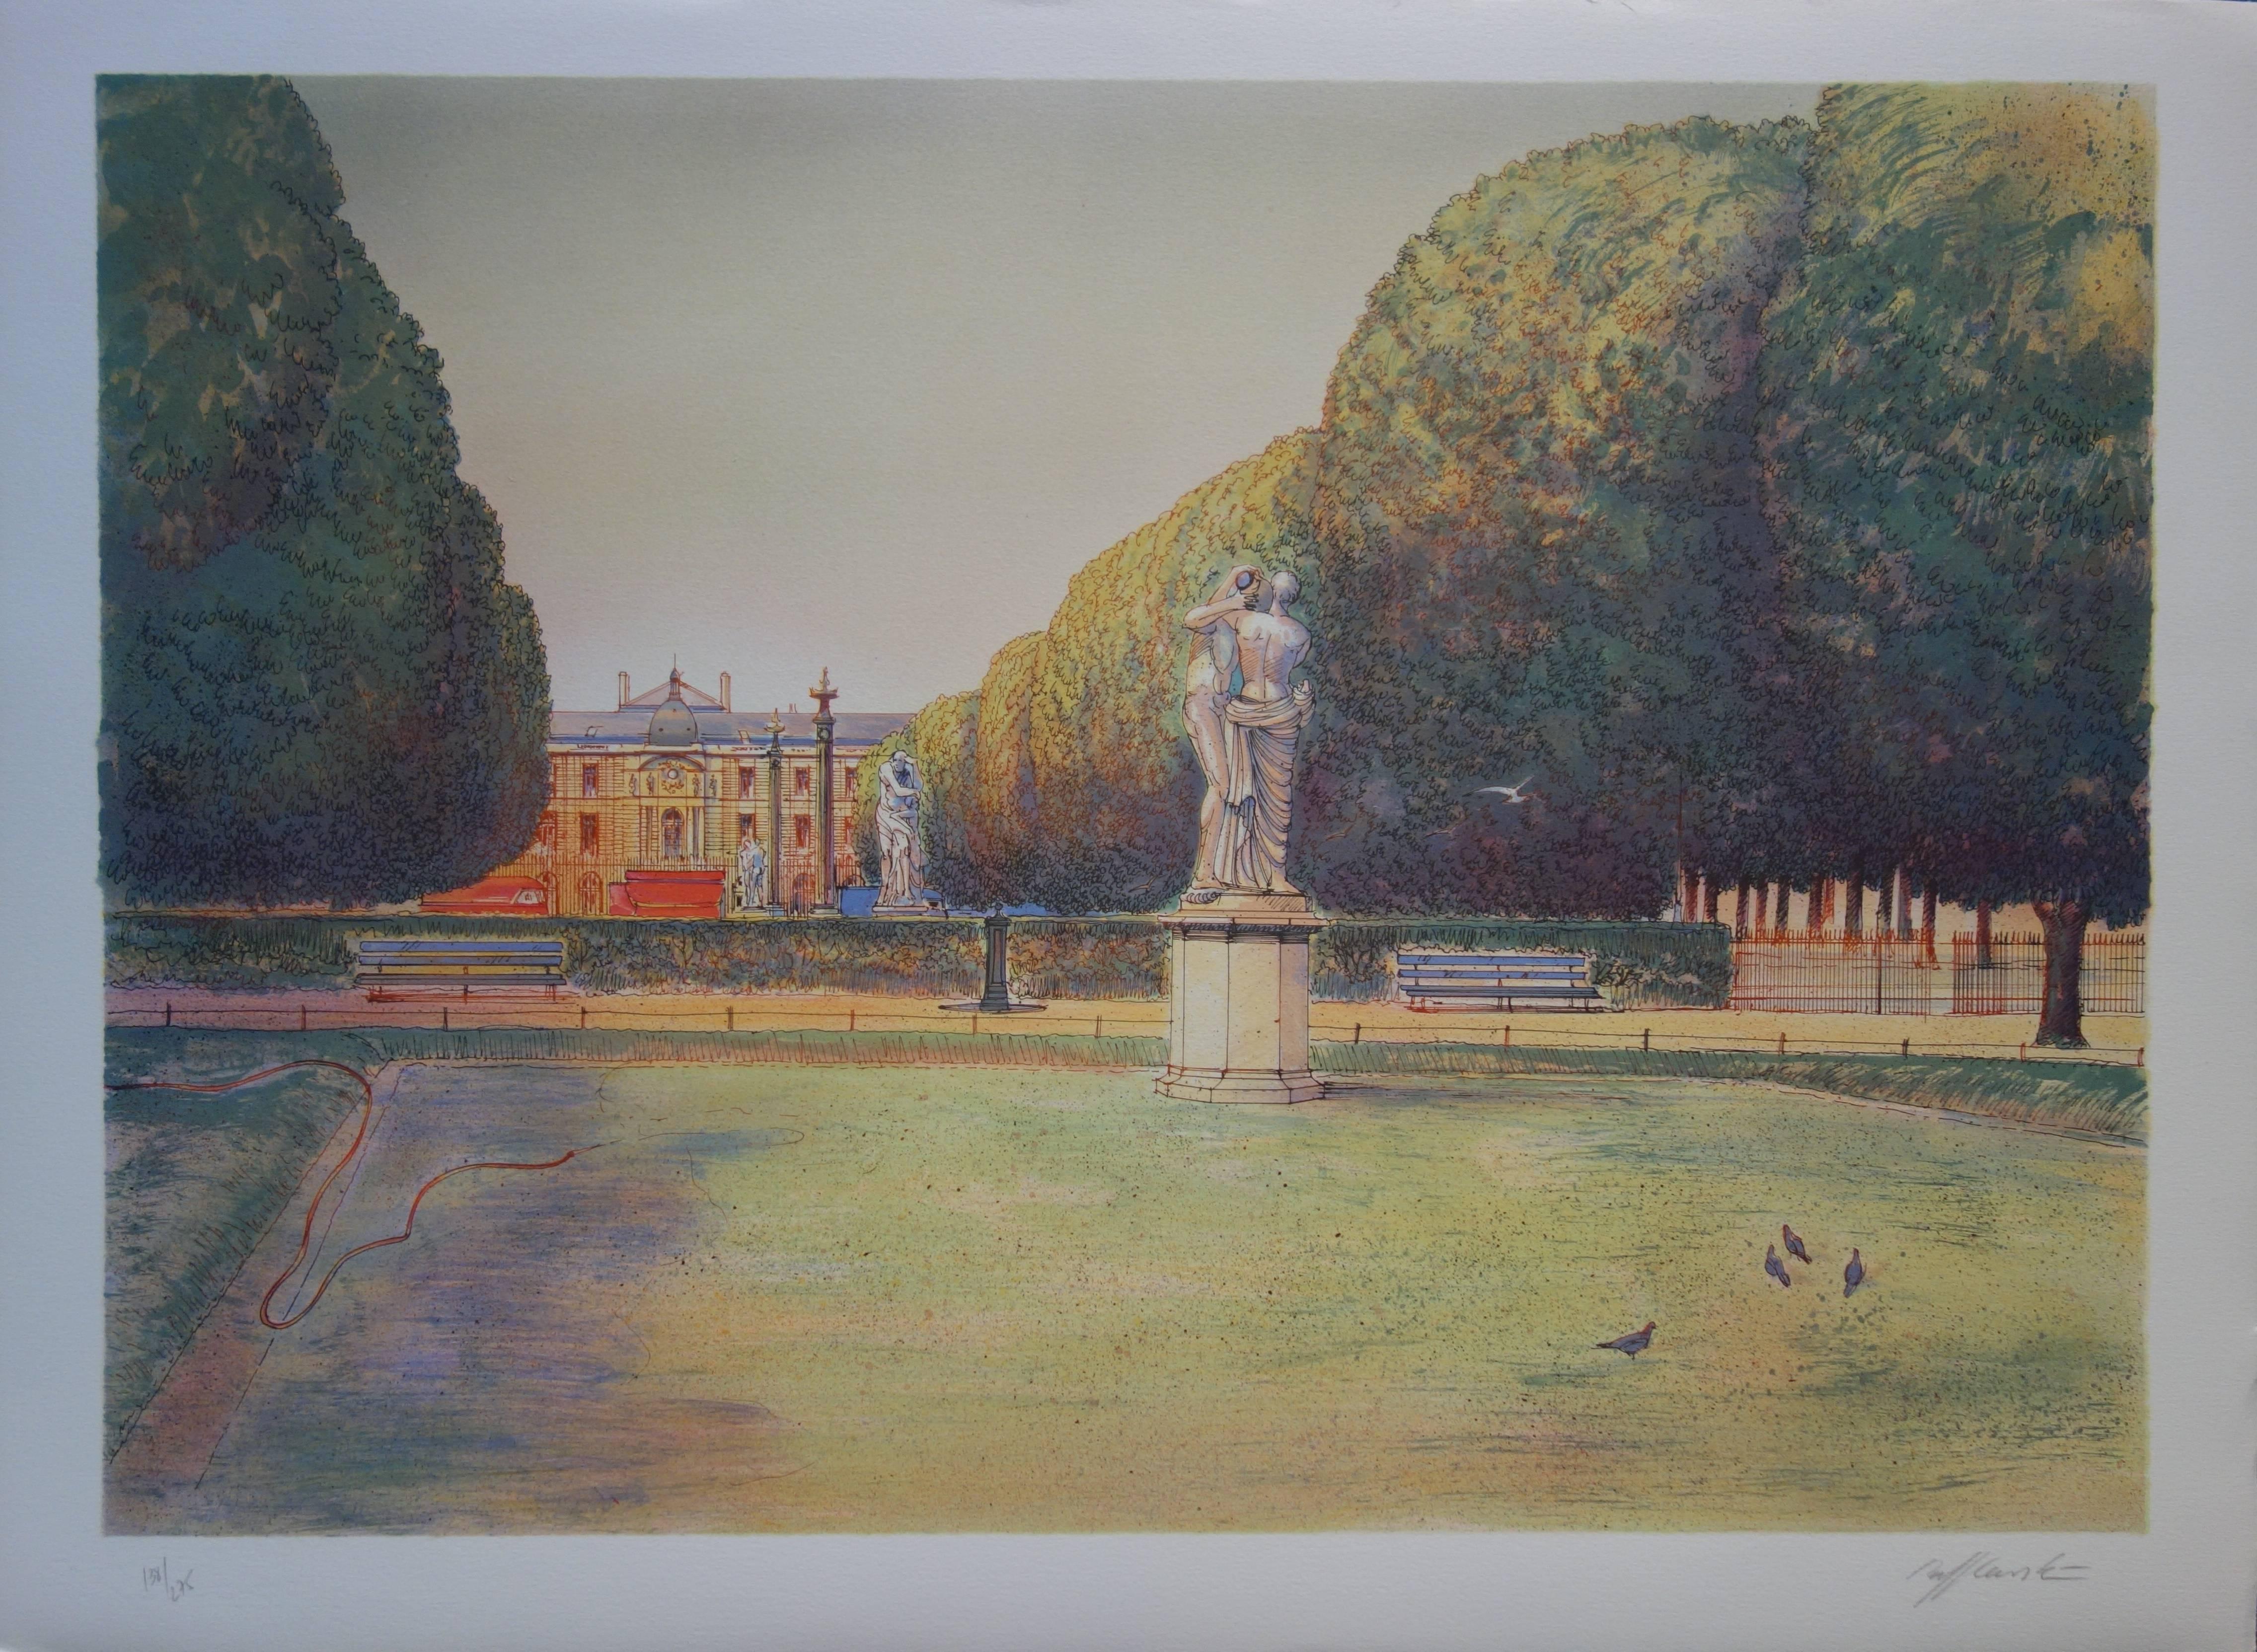 Square in Paris with the Kiss Sculpture - Original handsigned lithograph - 275ex